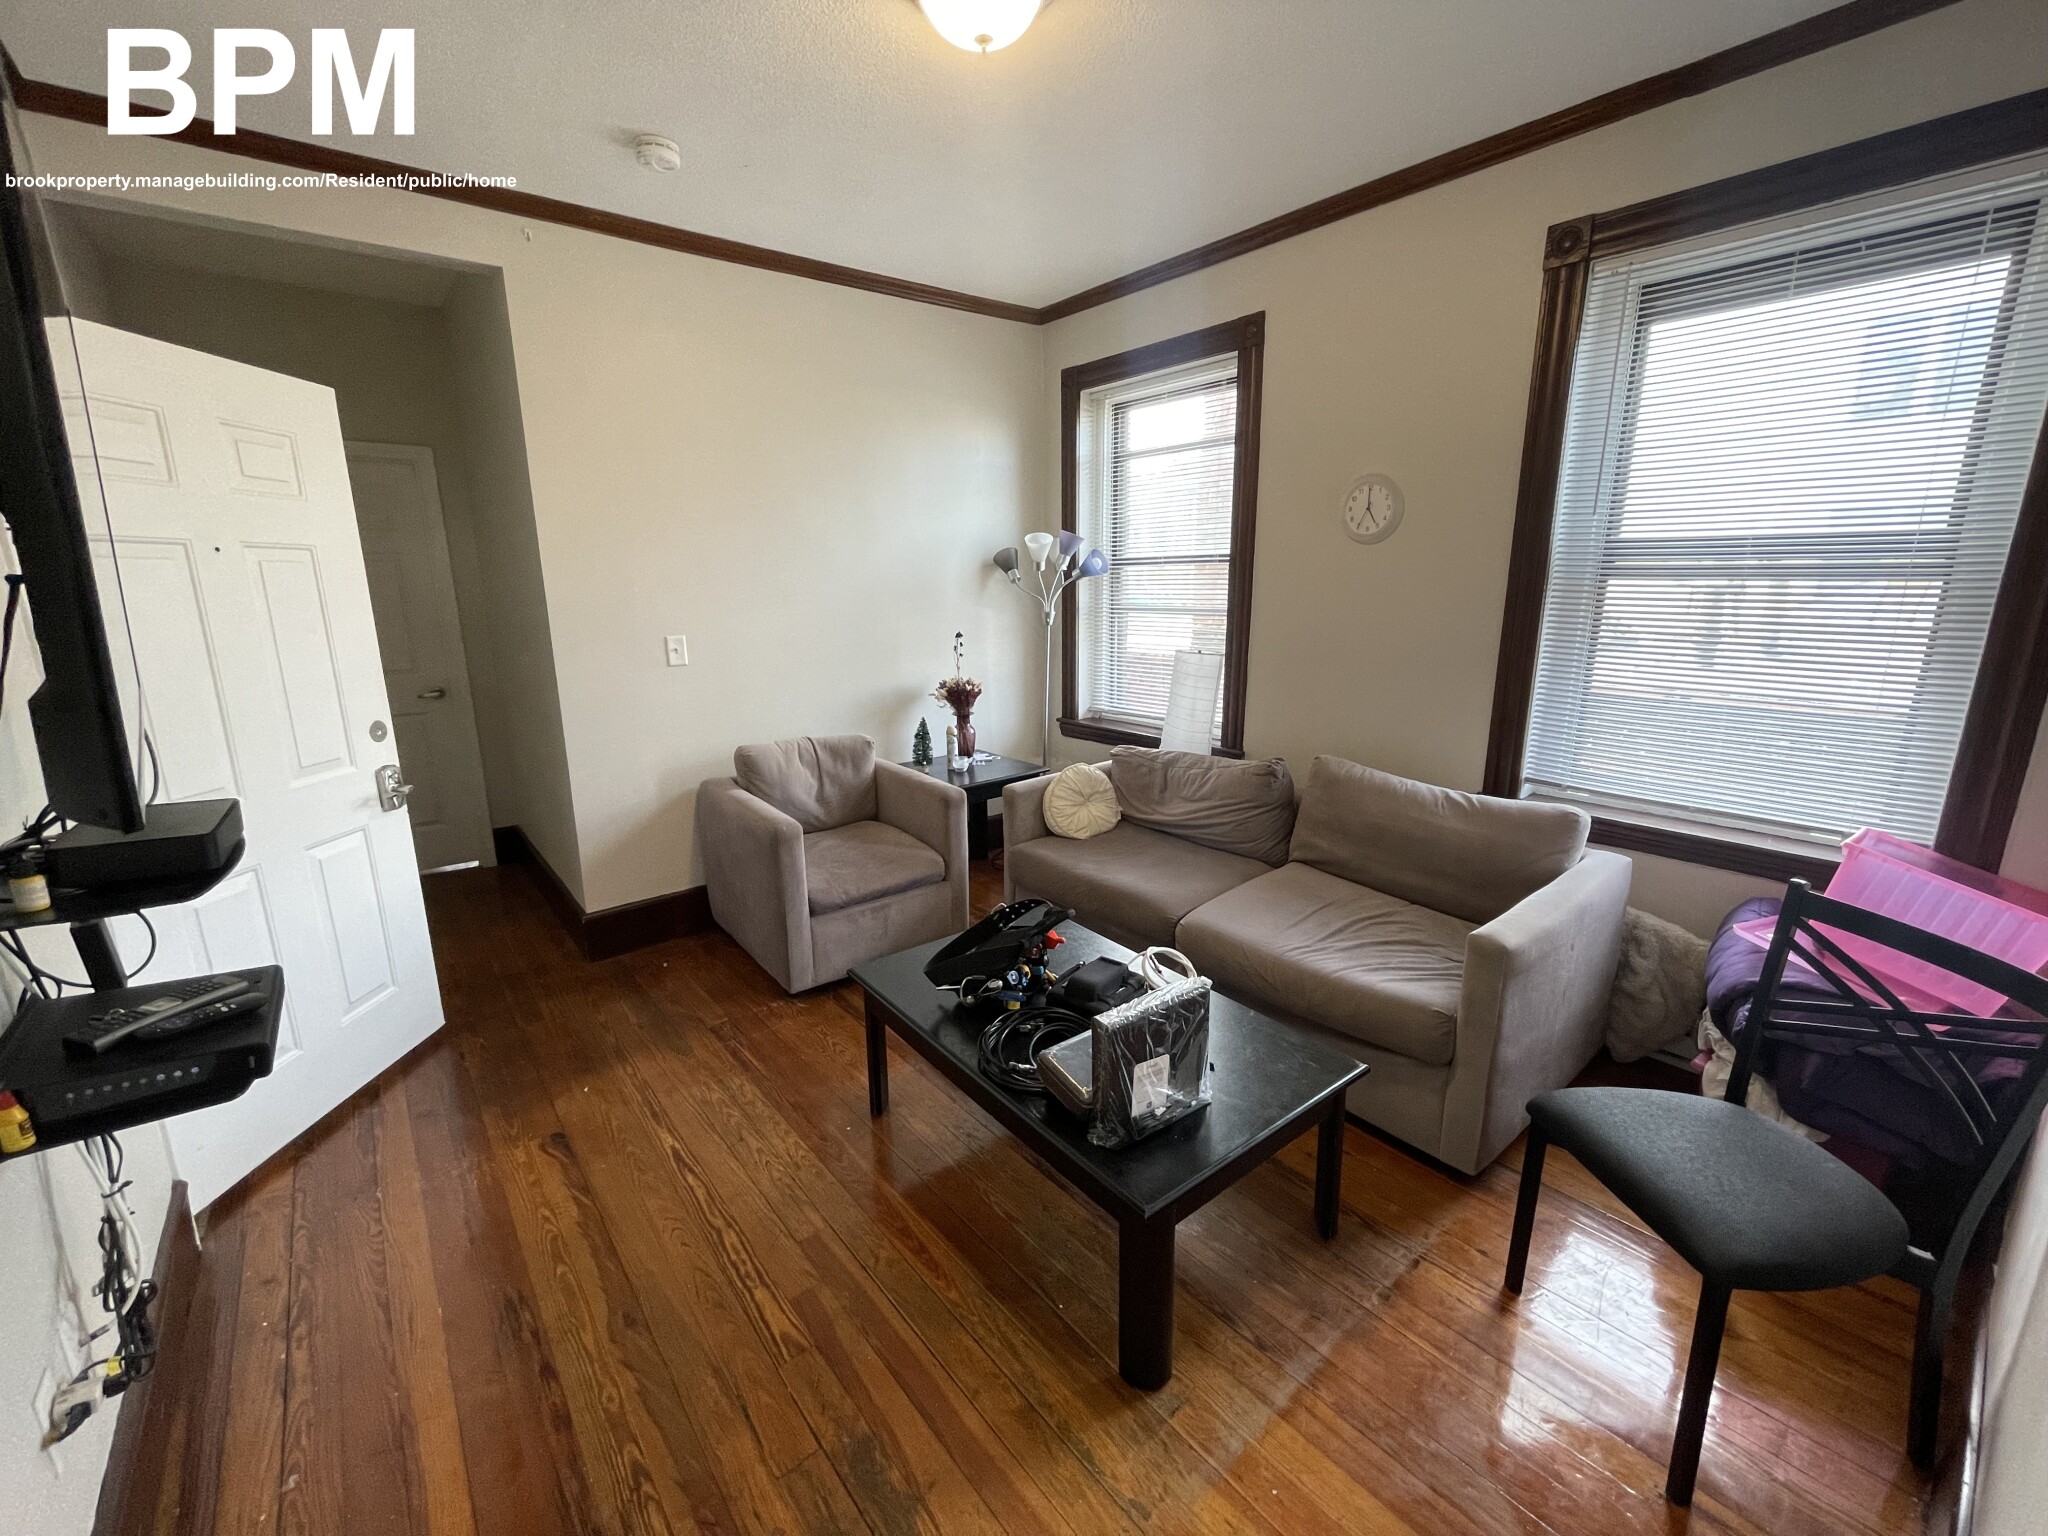 Photos of apartment on Shelby St.,Boston MA 02128